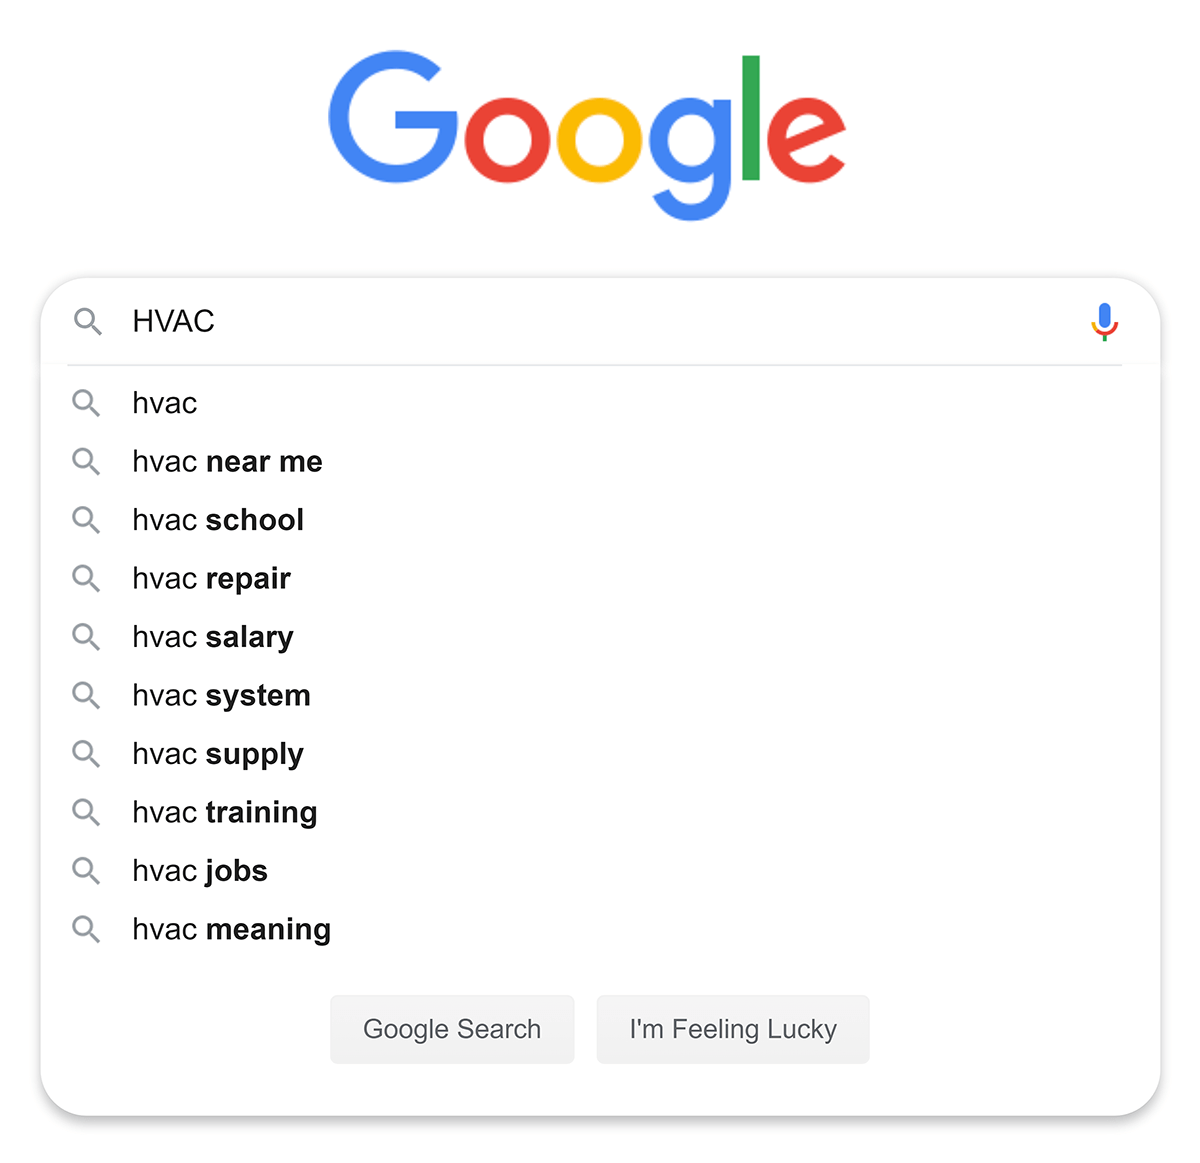 Google suggestions for "HVAC" search